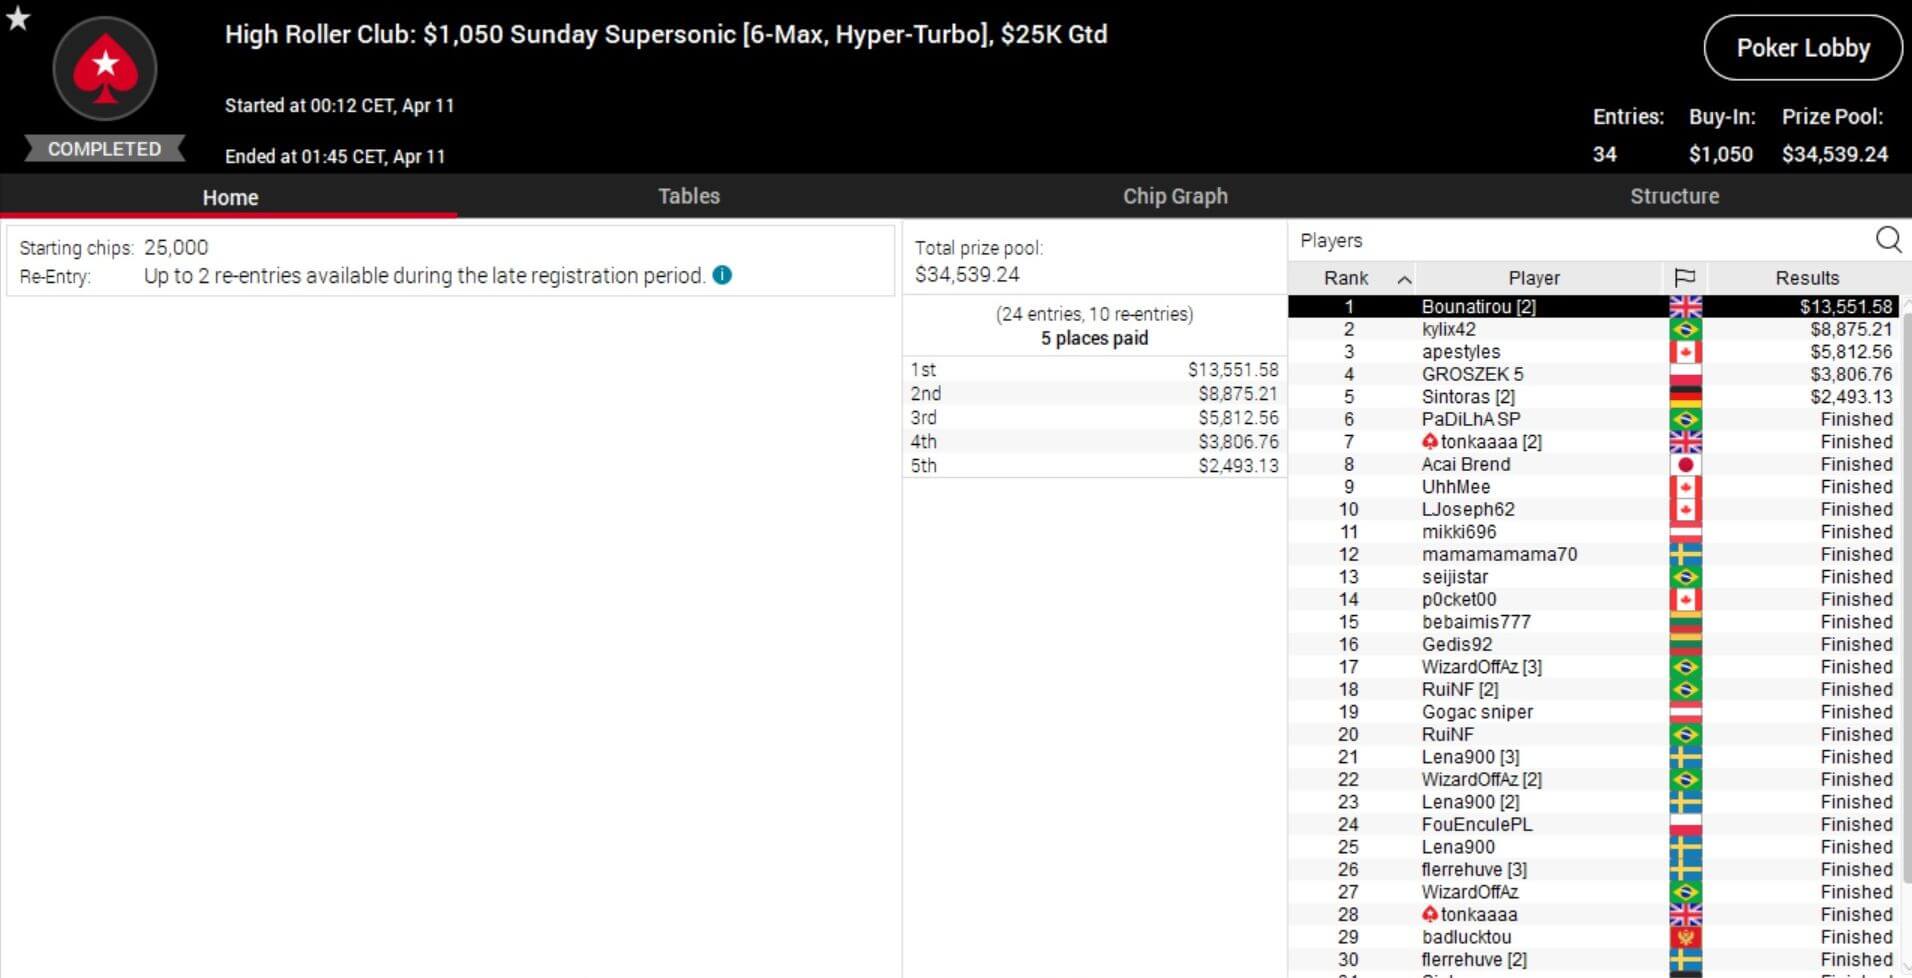 MTT Report - Ole Schemion and Dominik Nitsche with a first and second place